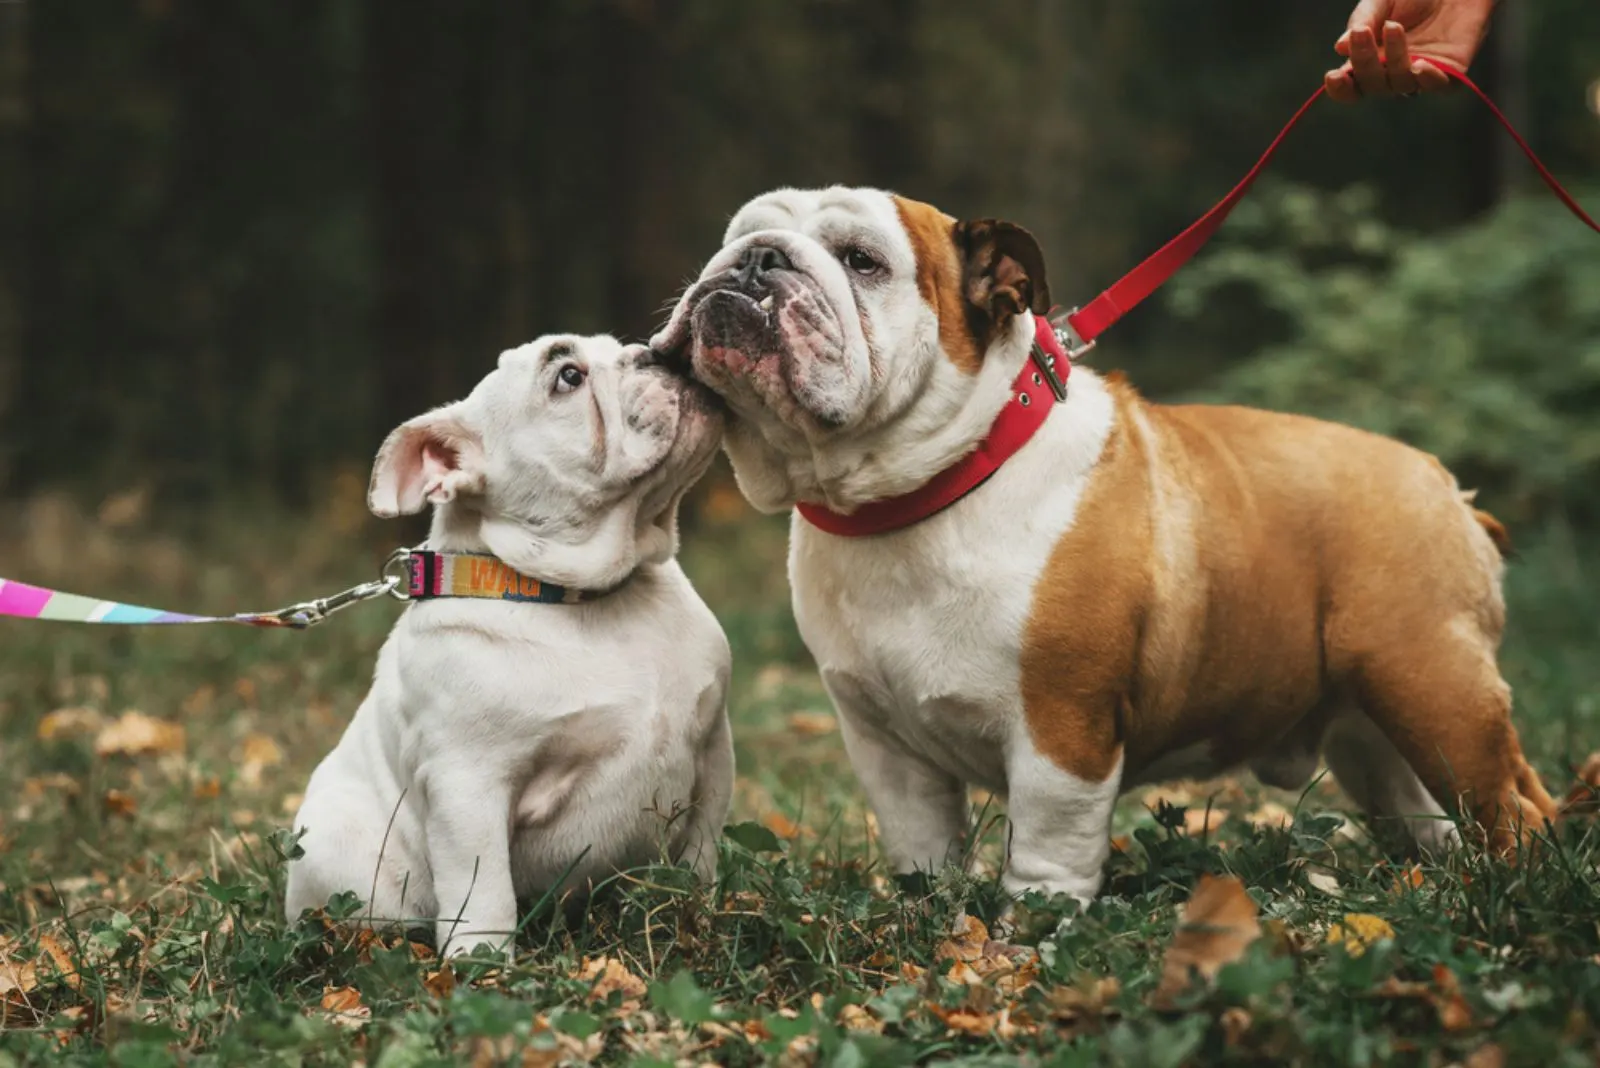 two english bulldogs sniffing each other in the park